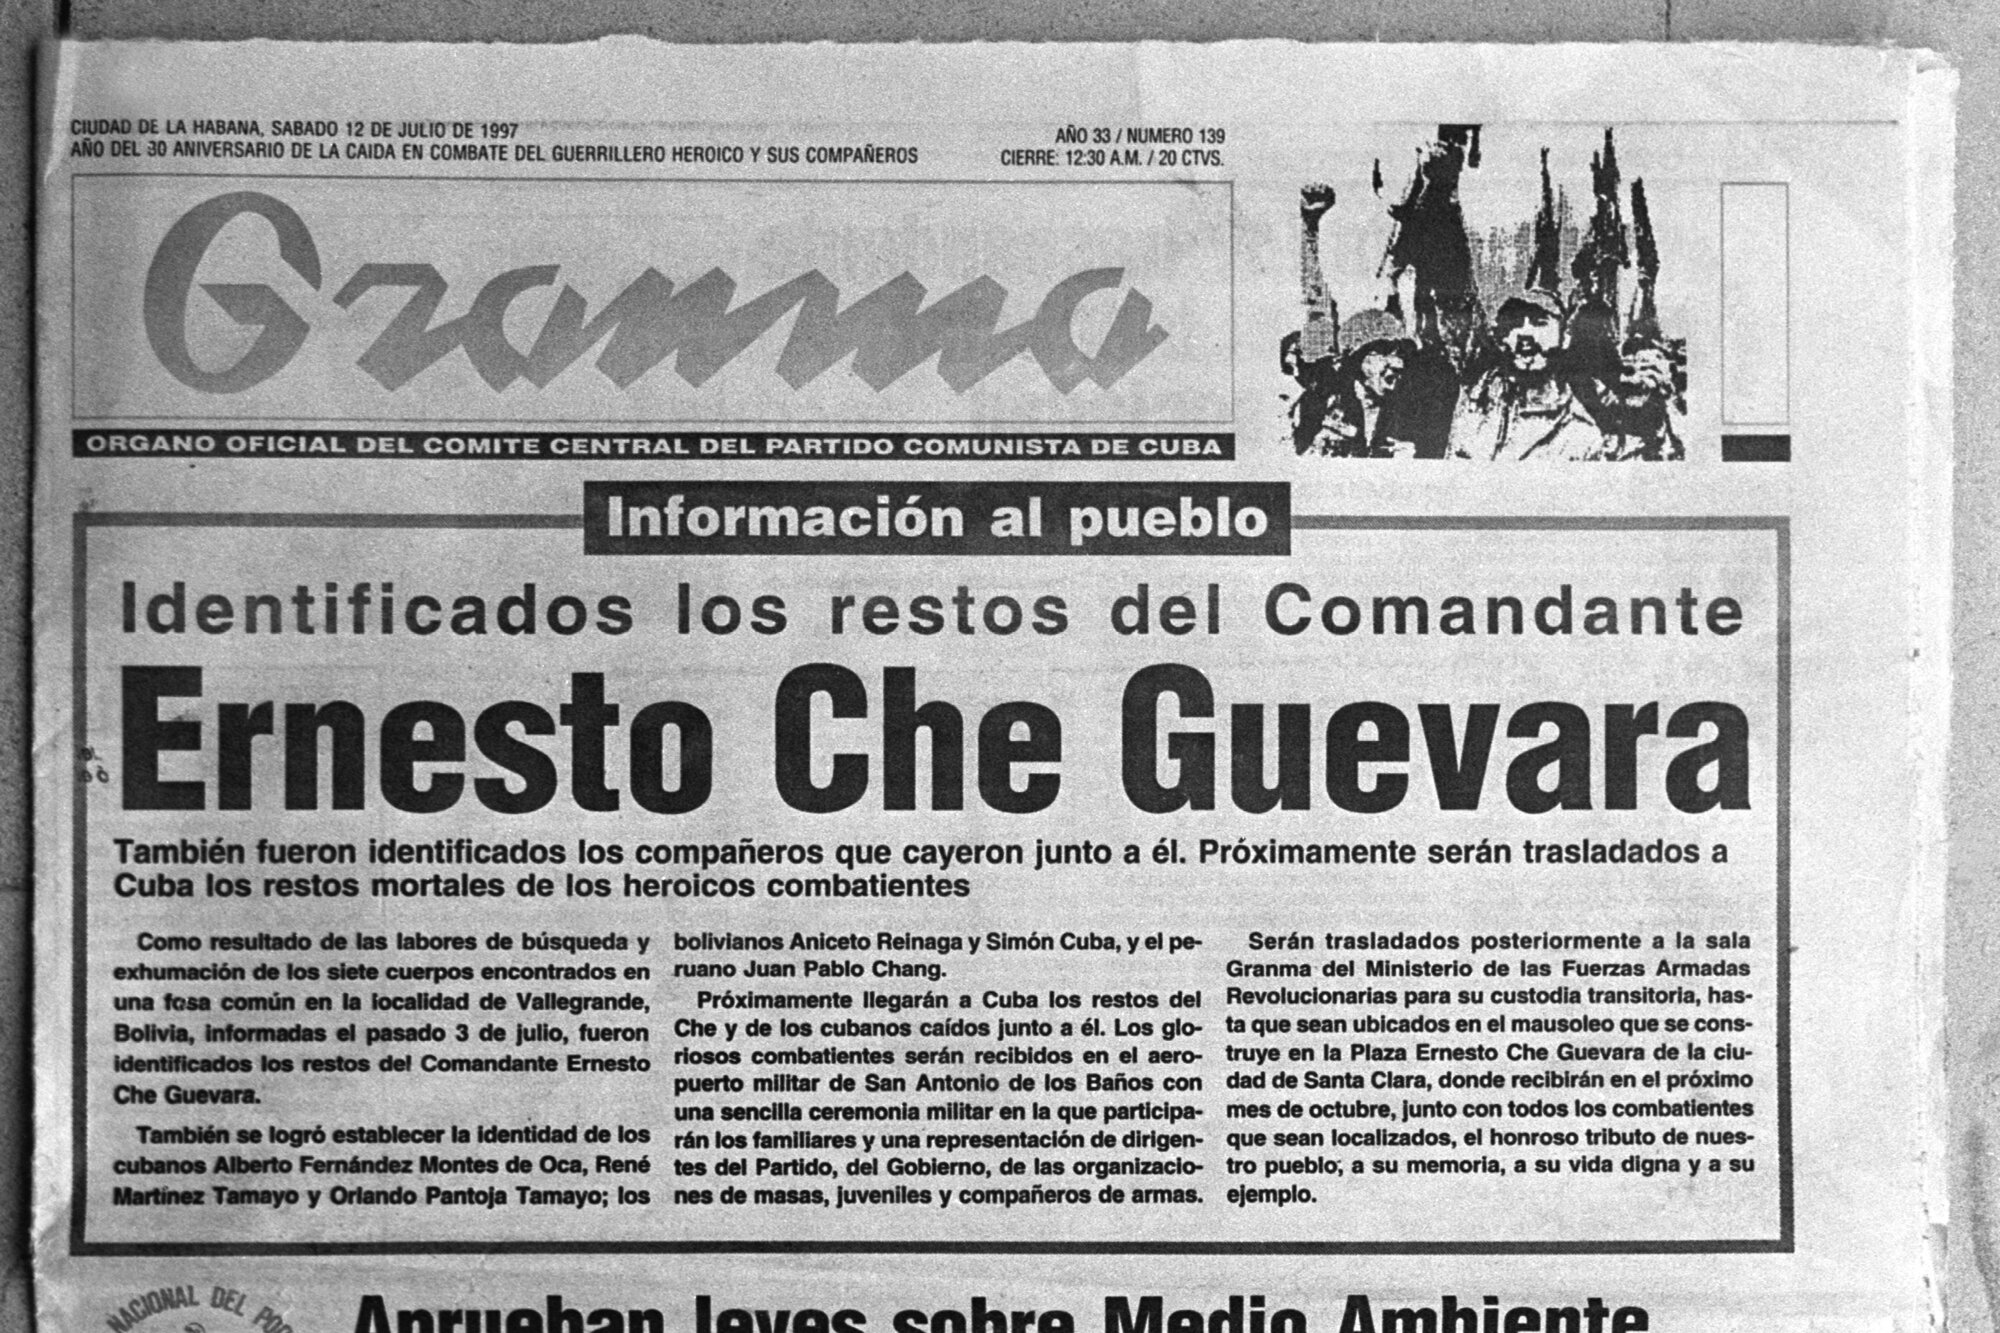  Granma, official party paper, announcing that the remains of Che Guevara were found in Bolivia, July 12, 1997. 